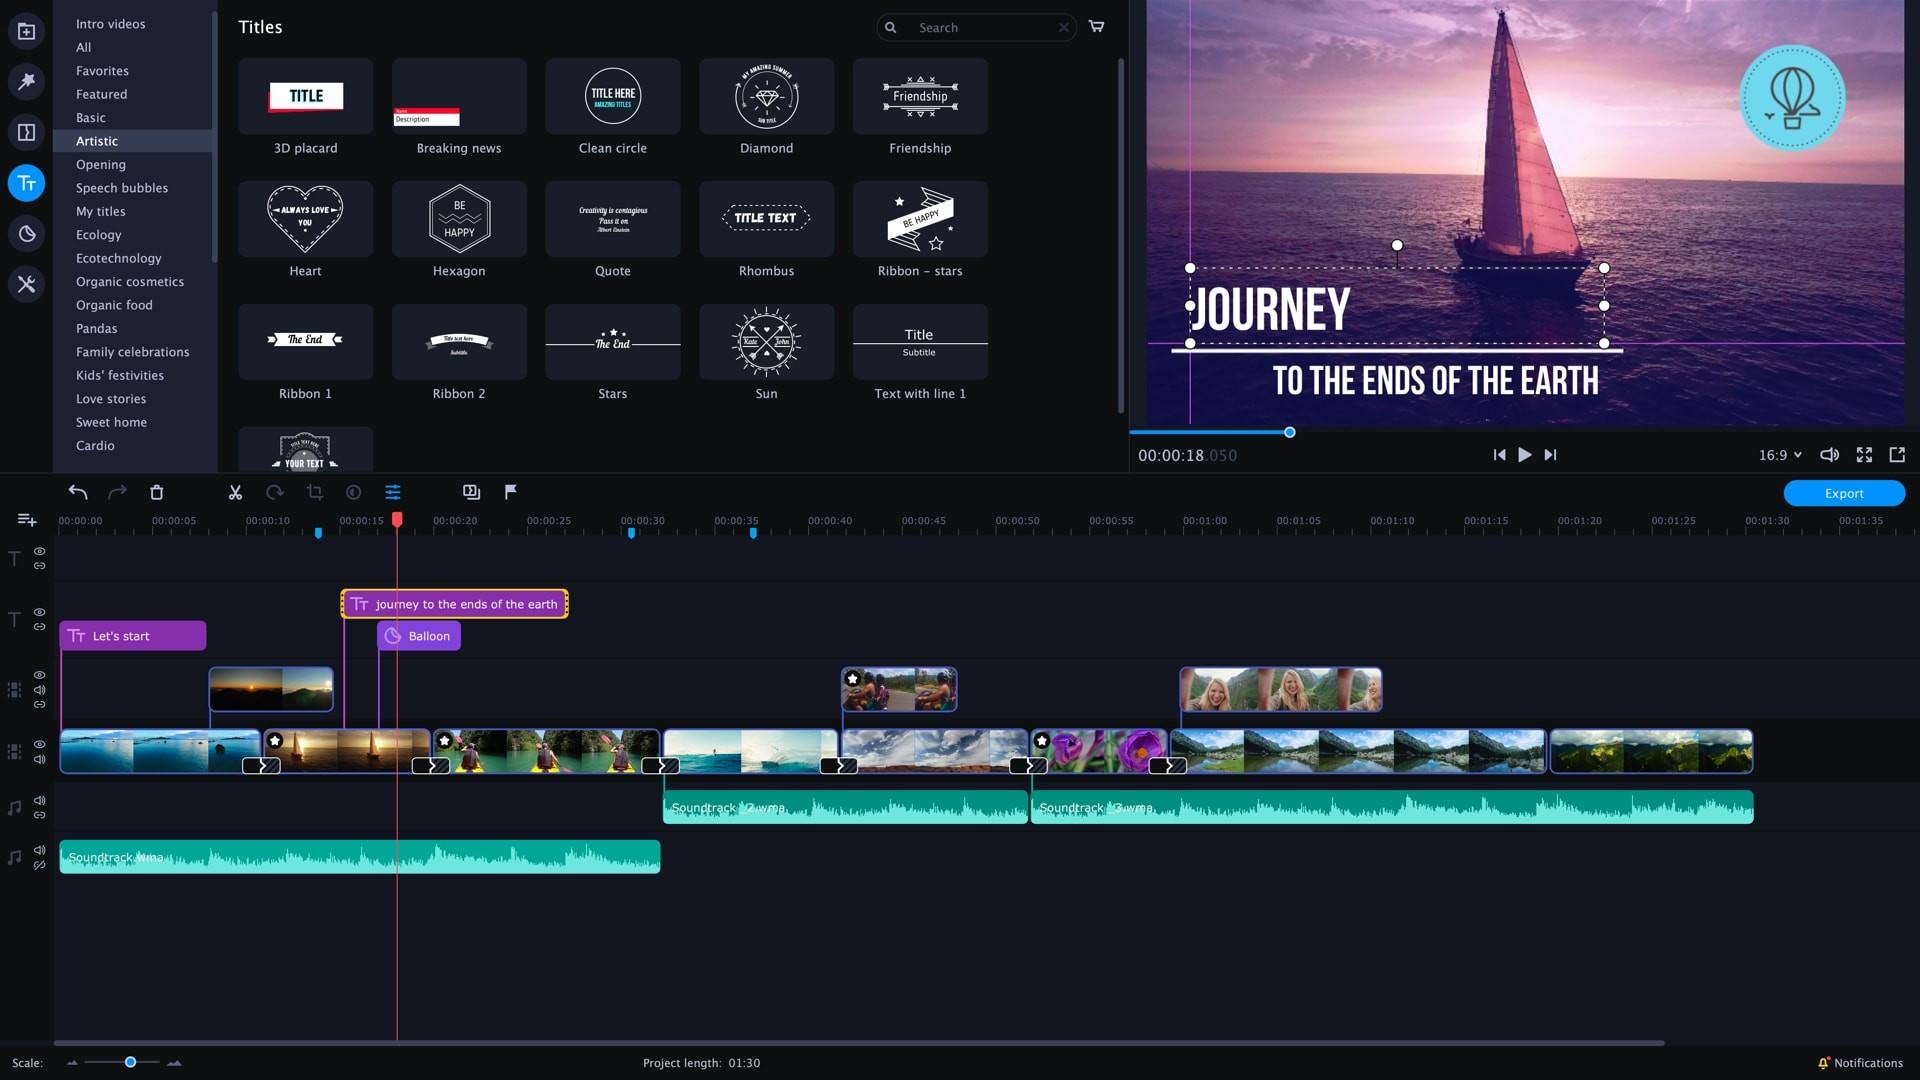 Screenshot №2 from game Movavi Video Editor Plus 2020 - Video Editing Software